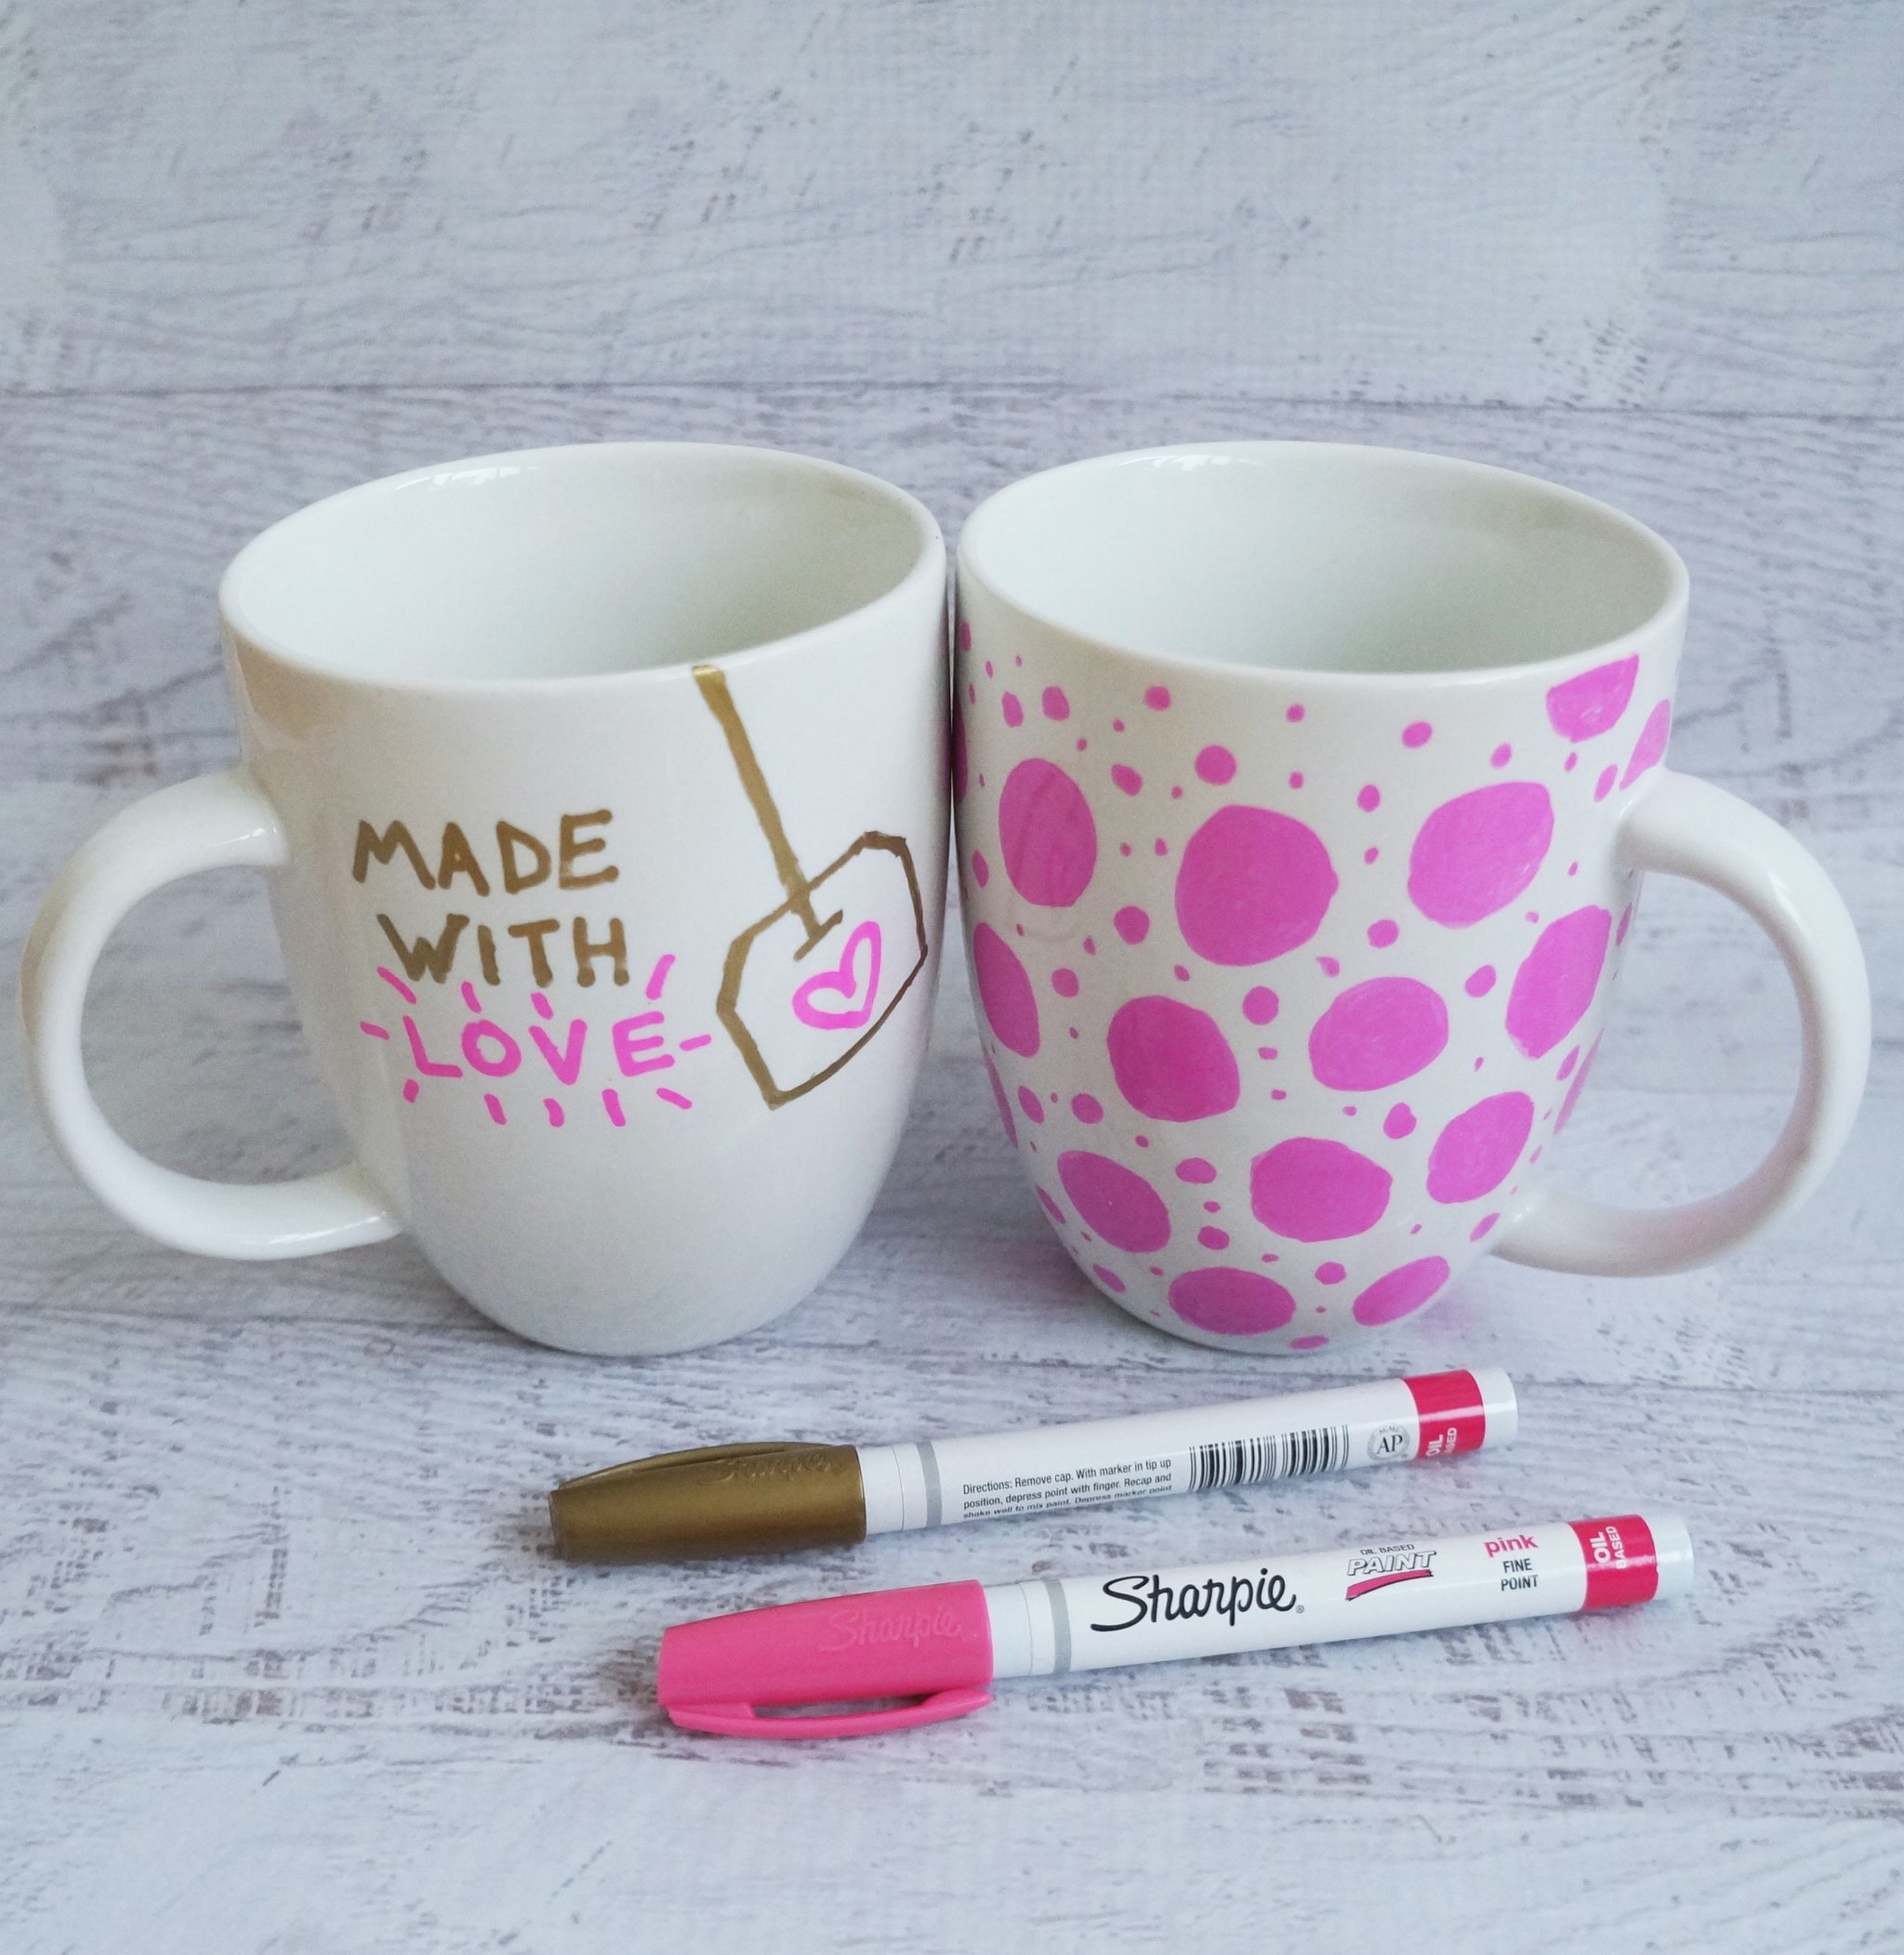 Brightly coloured paint sharpie mugs